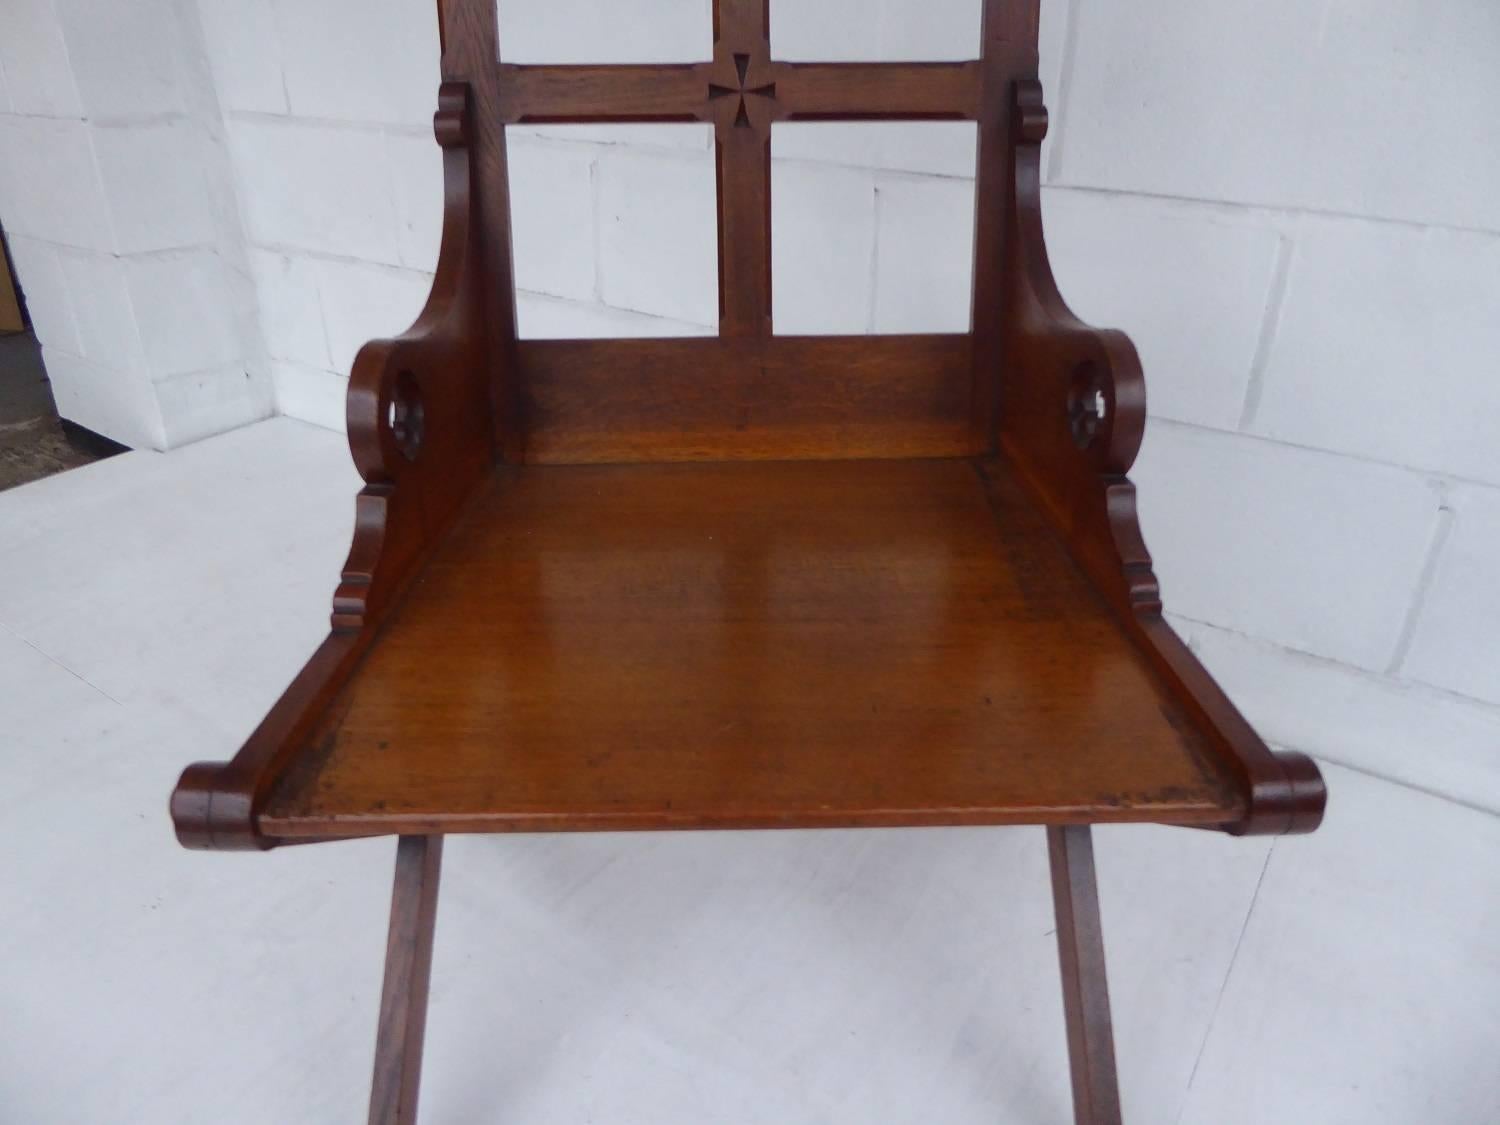 For sale is a good quality 19th century solid oak Gothic revival armchair. The chair is in excellent, original condition.